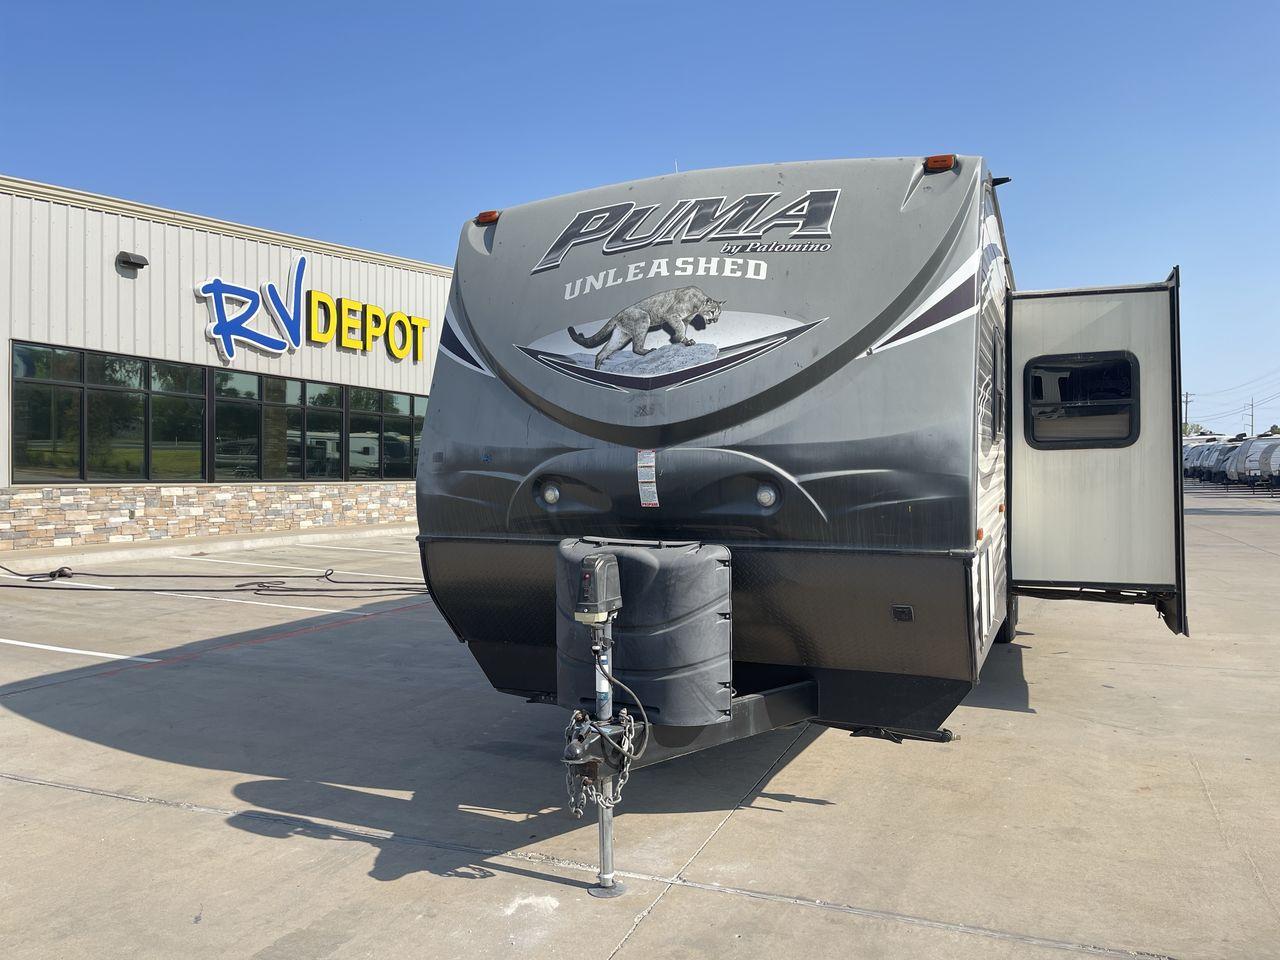 2015 PALOMINO PUMA UNLEASHED 30THS (4X4TPTF22FP) , Length: 35.33 ft. | Dry Weight: 7,345 lbs. | Gross Weight: 10,879 lbs. | Slides: 1 transmission, located at 4319 N Main St, Cleburne, TX, 76033, (817) 678-5133, 32.385960, -97.391212 - The 2015 Palomino Puma Unleashed 30THS is a dual-axle steel wheel setup measuring 35.33 ft. in length. It has a dry weight of 7,345 lbs. and a GVWR of 10,879 lbs. Its exterior is a base color of tan with cool black graphics. It includes one power slide as well as one 16-foot power awning. This toy h - Photo #0